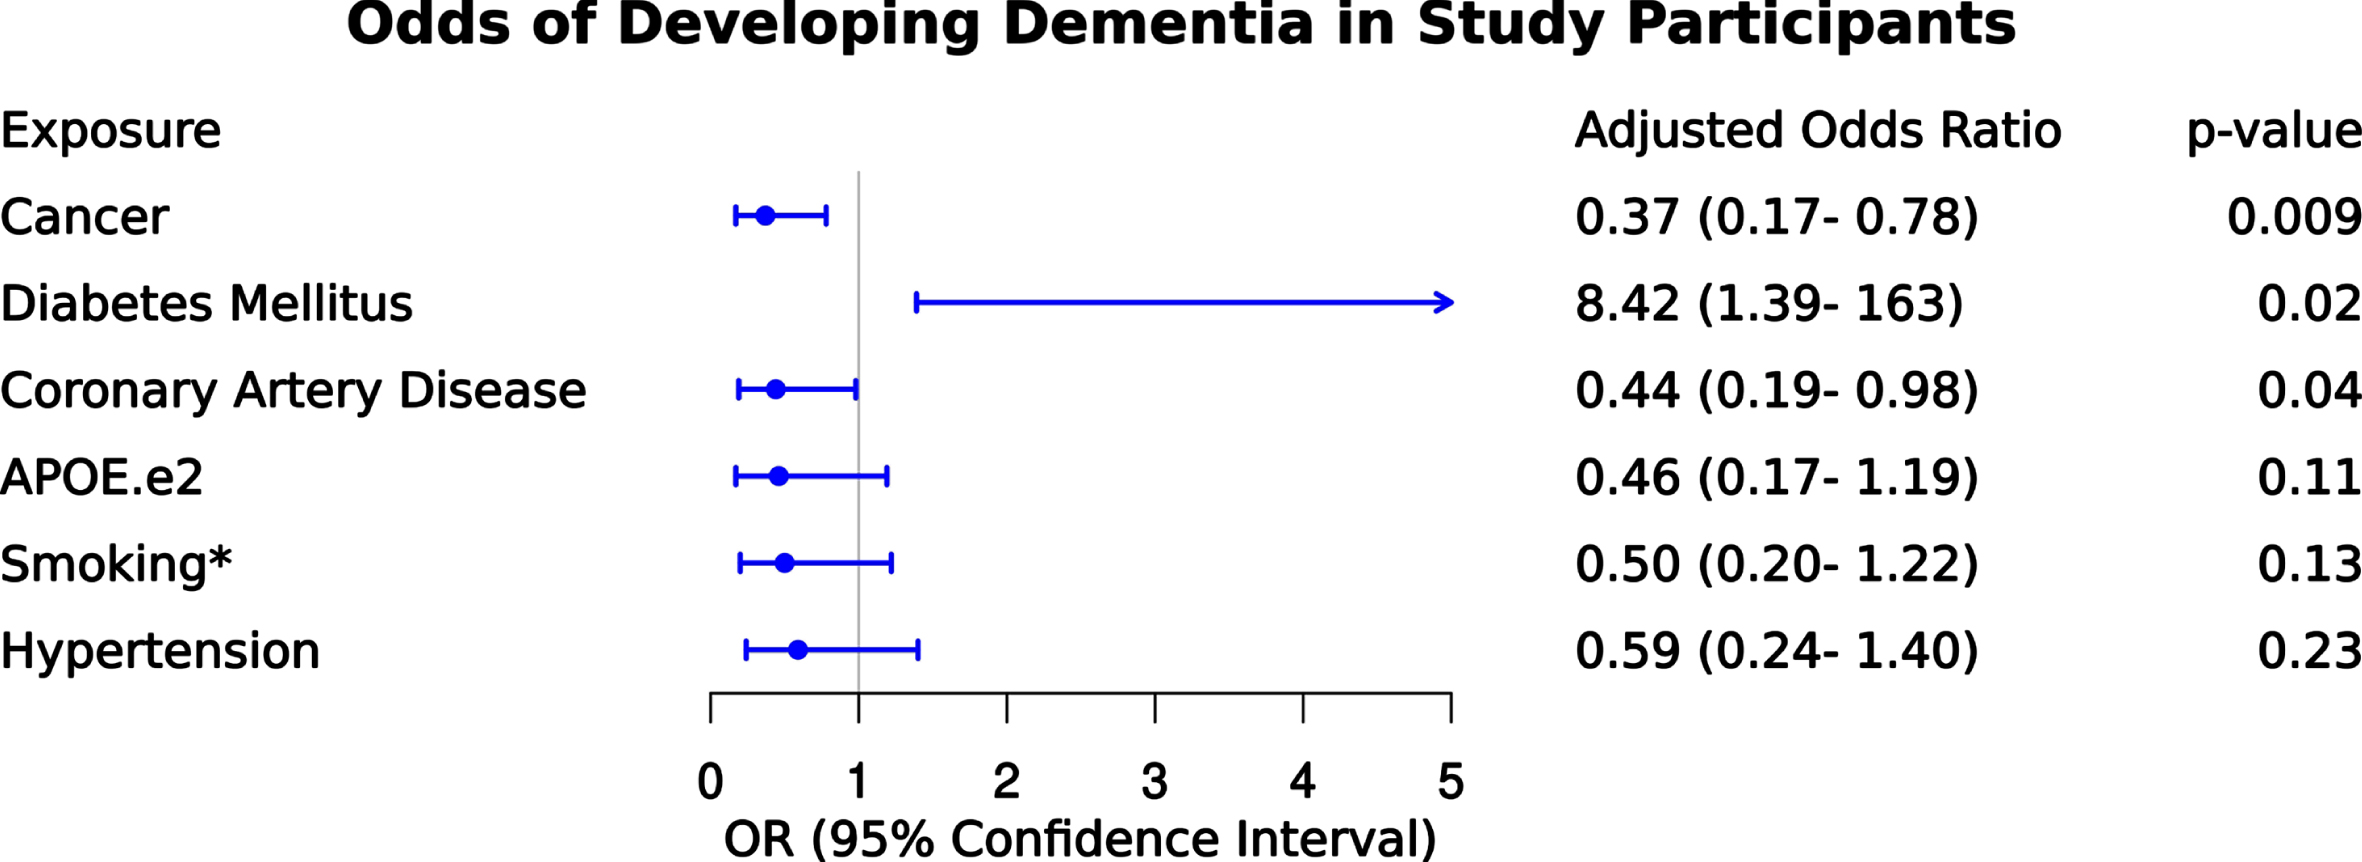 Odds of dementia given exposure to clinical variables. Results of multivariable logistic regression depicting odds of dementia given exposure to clinical variables including cancer, diabetes mellitus, coronary artery disease, APOE ɛ2, smoking* (including former and current smoker categories as described in methods), and hypertension. The adjusted odds ratio is provided for each variable to contextualize independent association after controlling for other variables in the model.